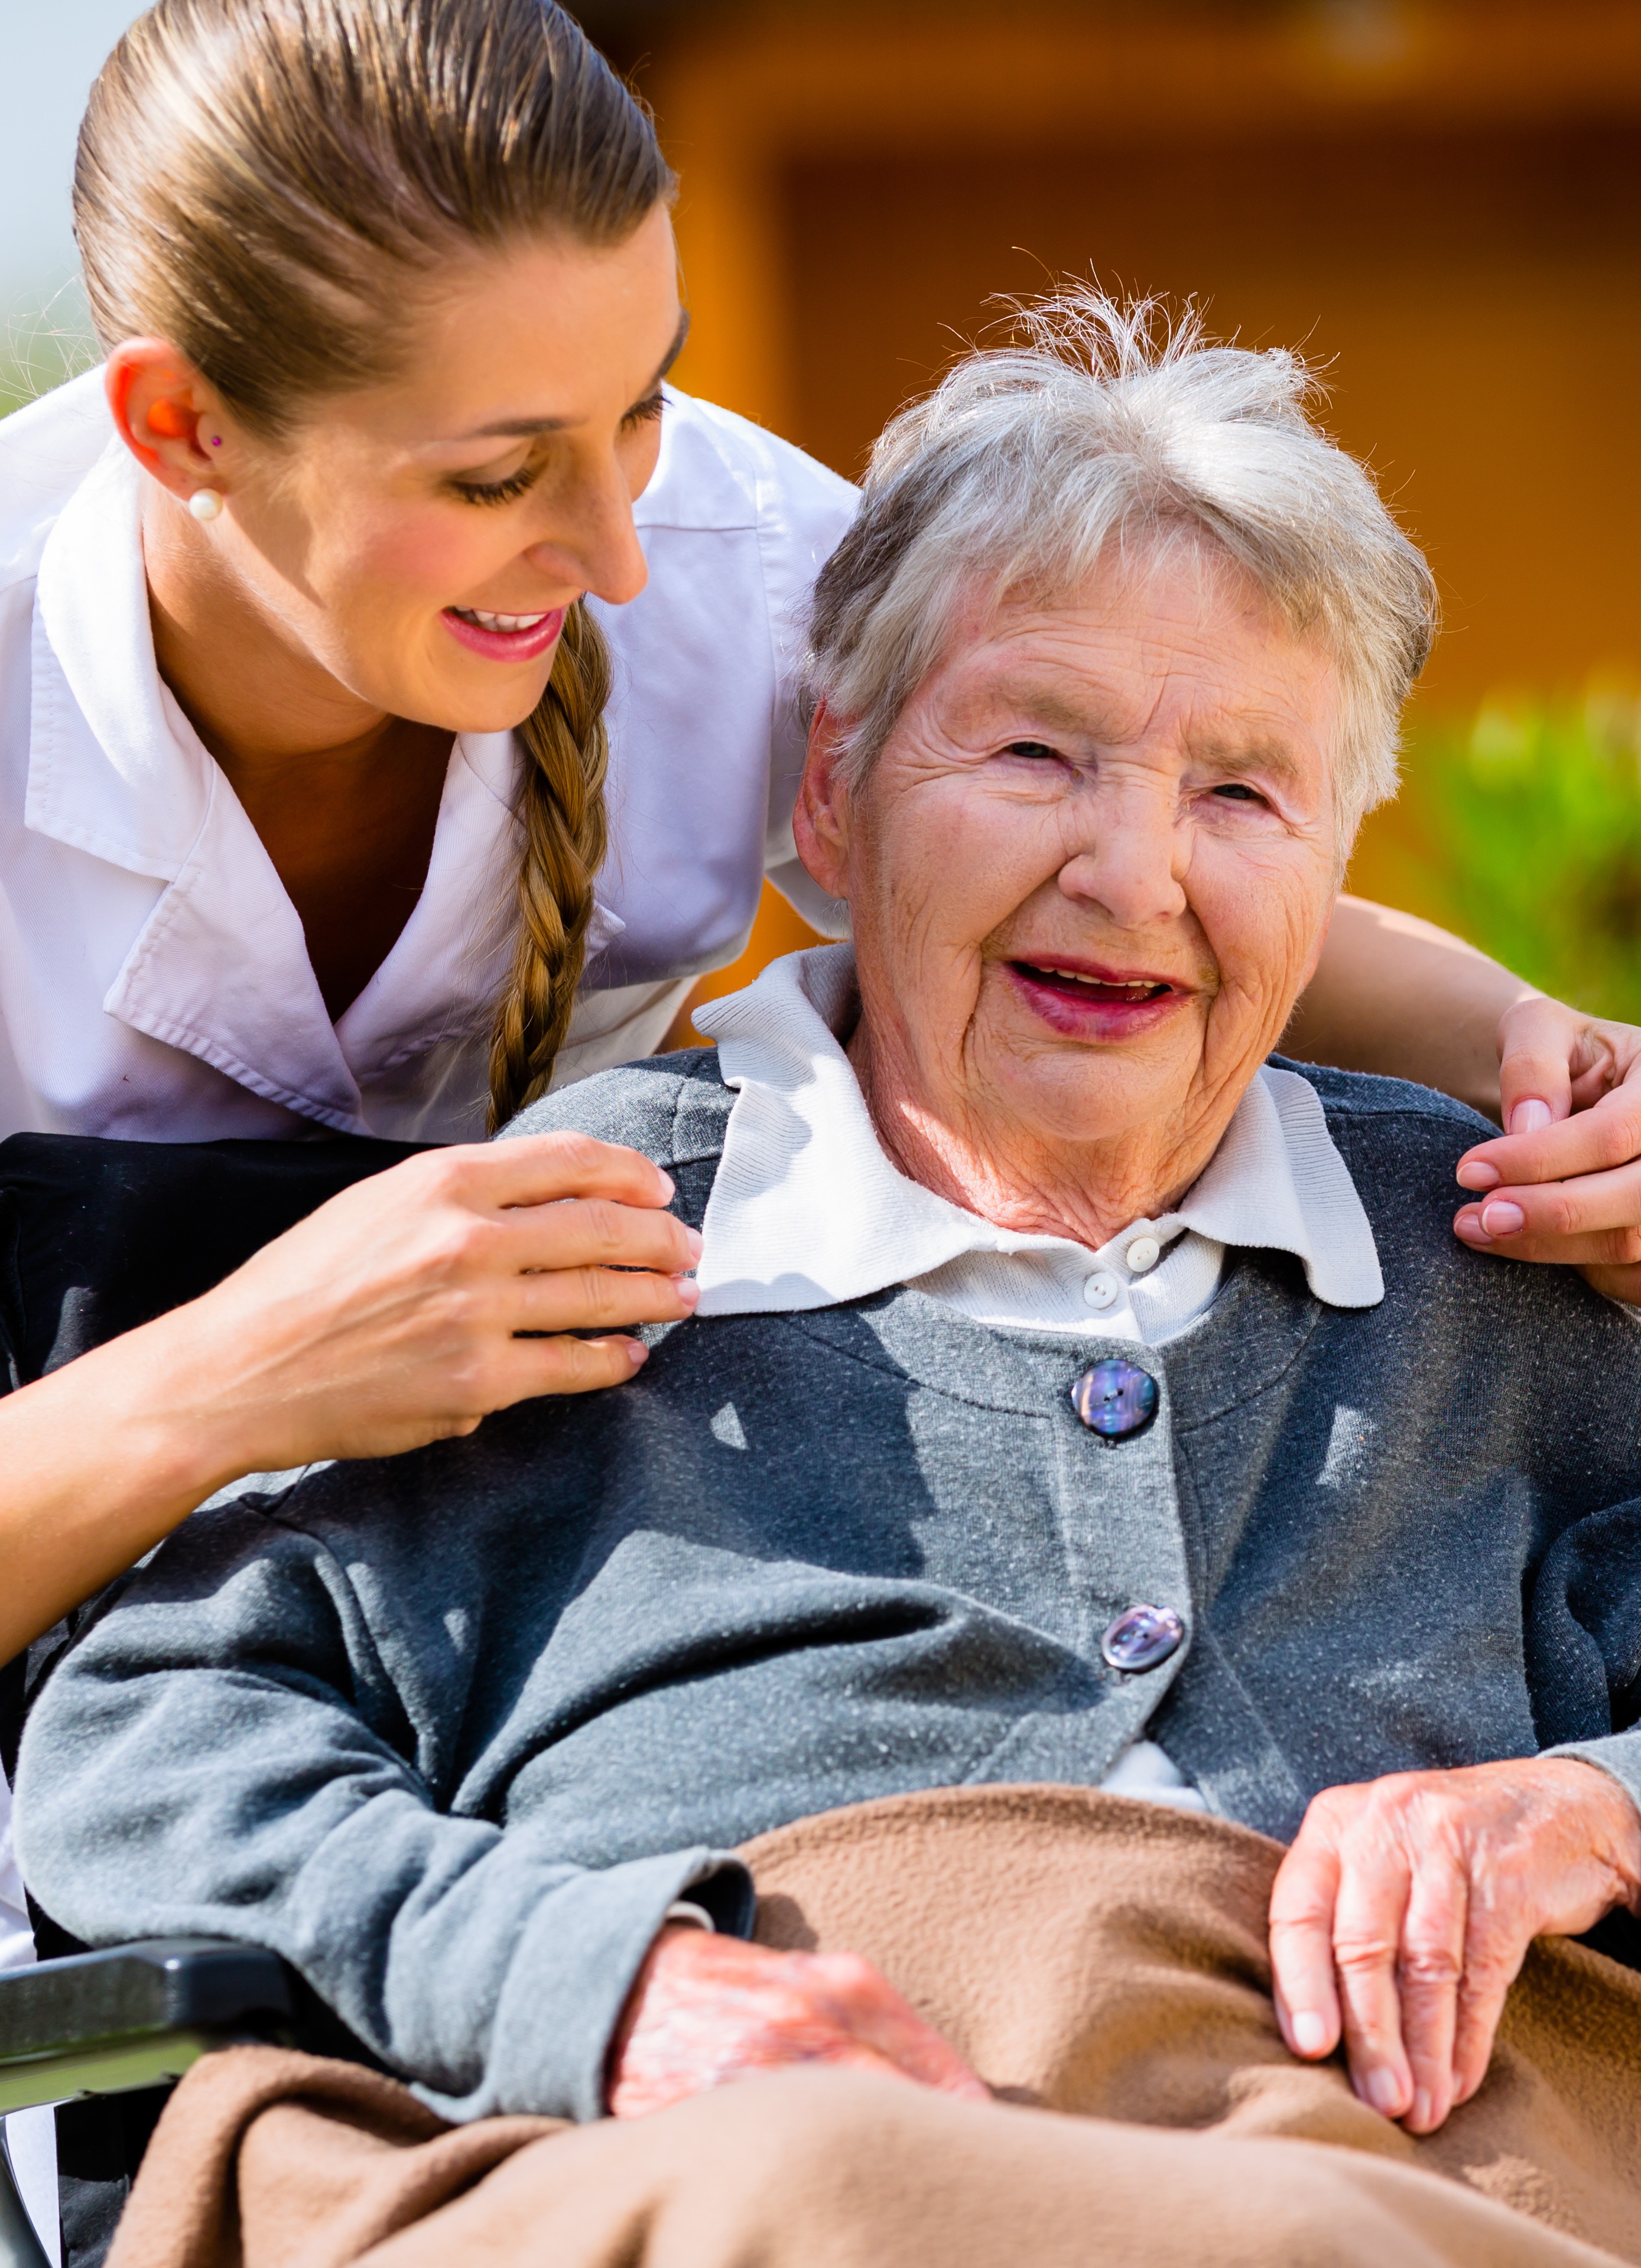 Photo of a Long-term Care Caregiver woman with her elderly Caretaker